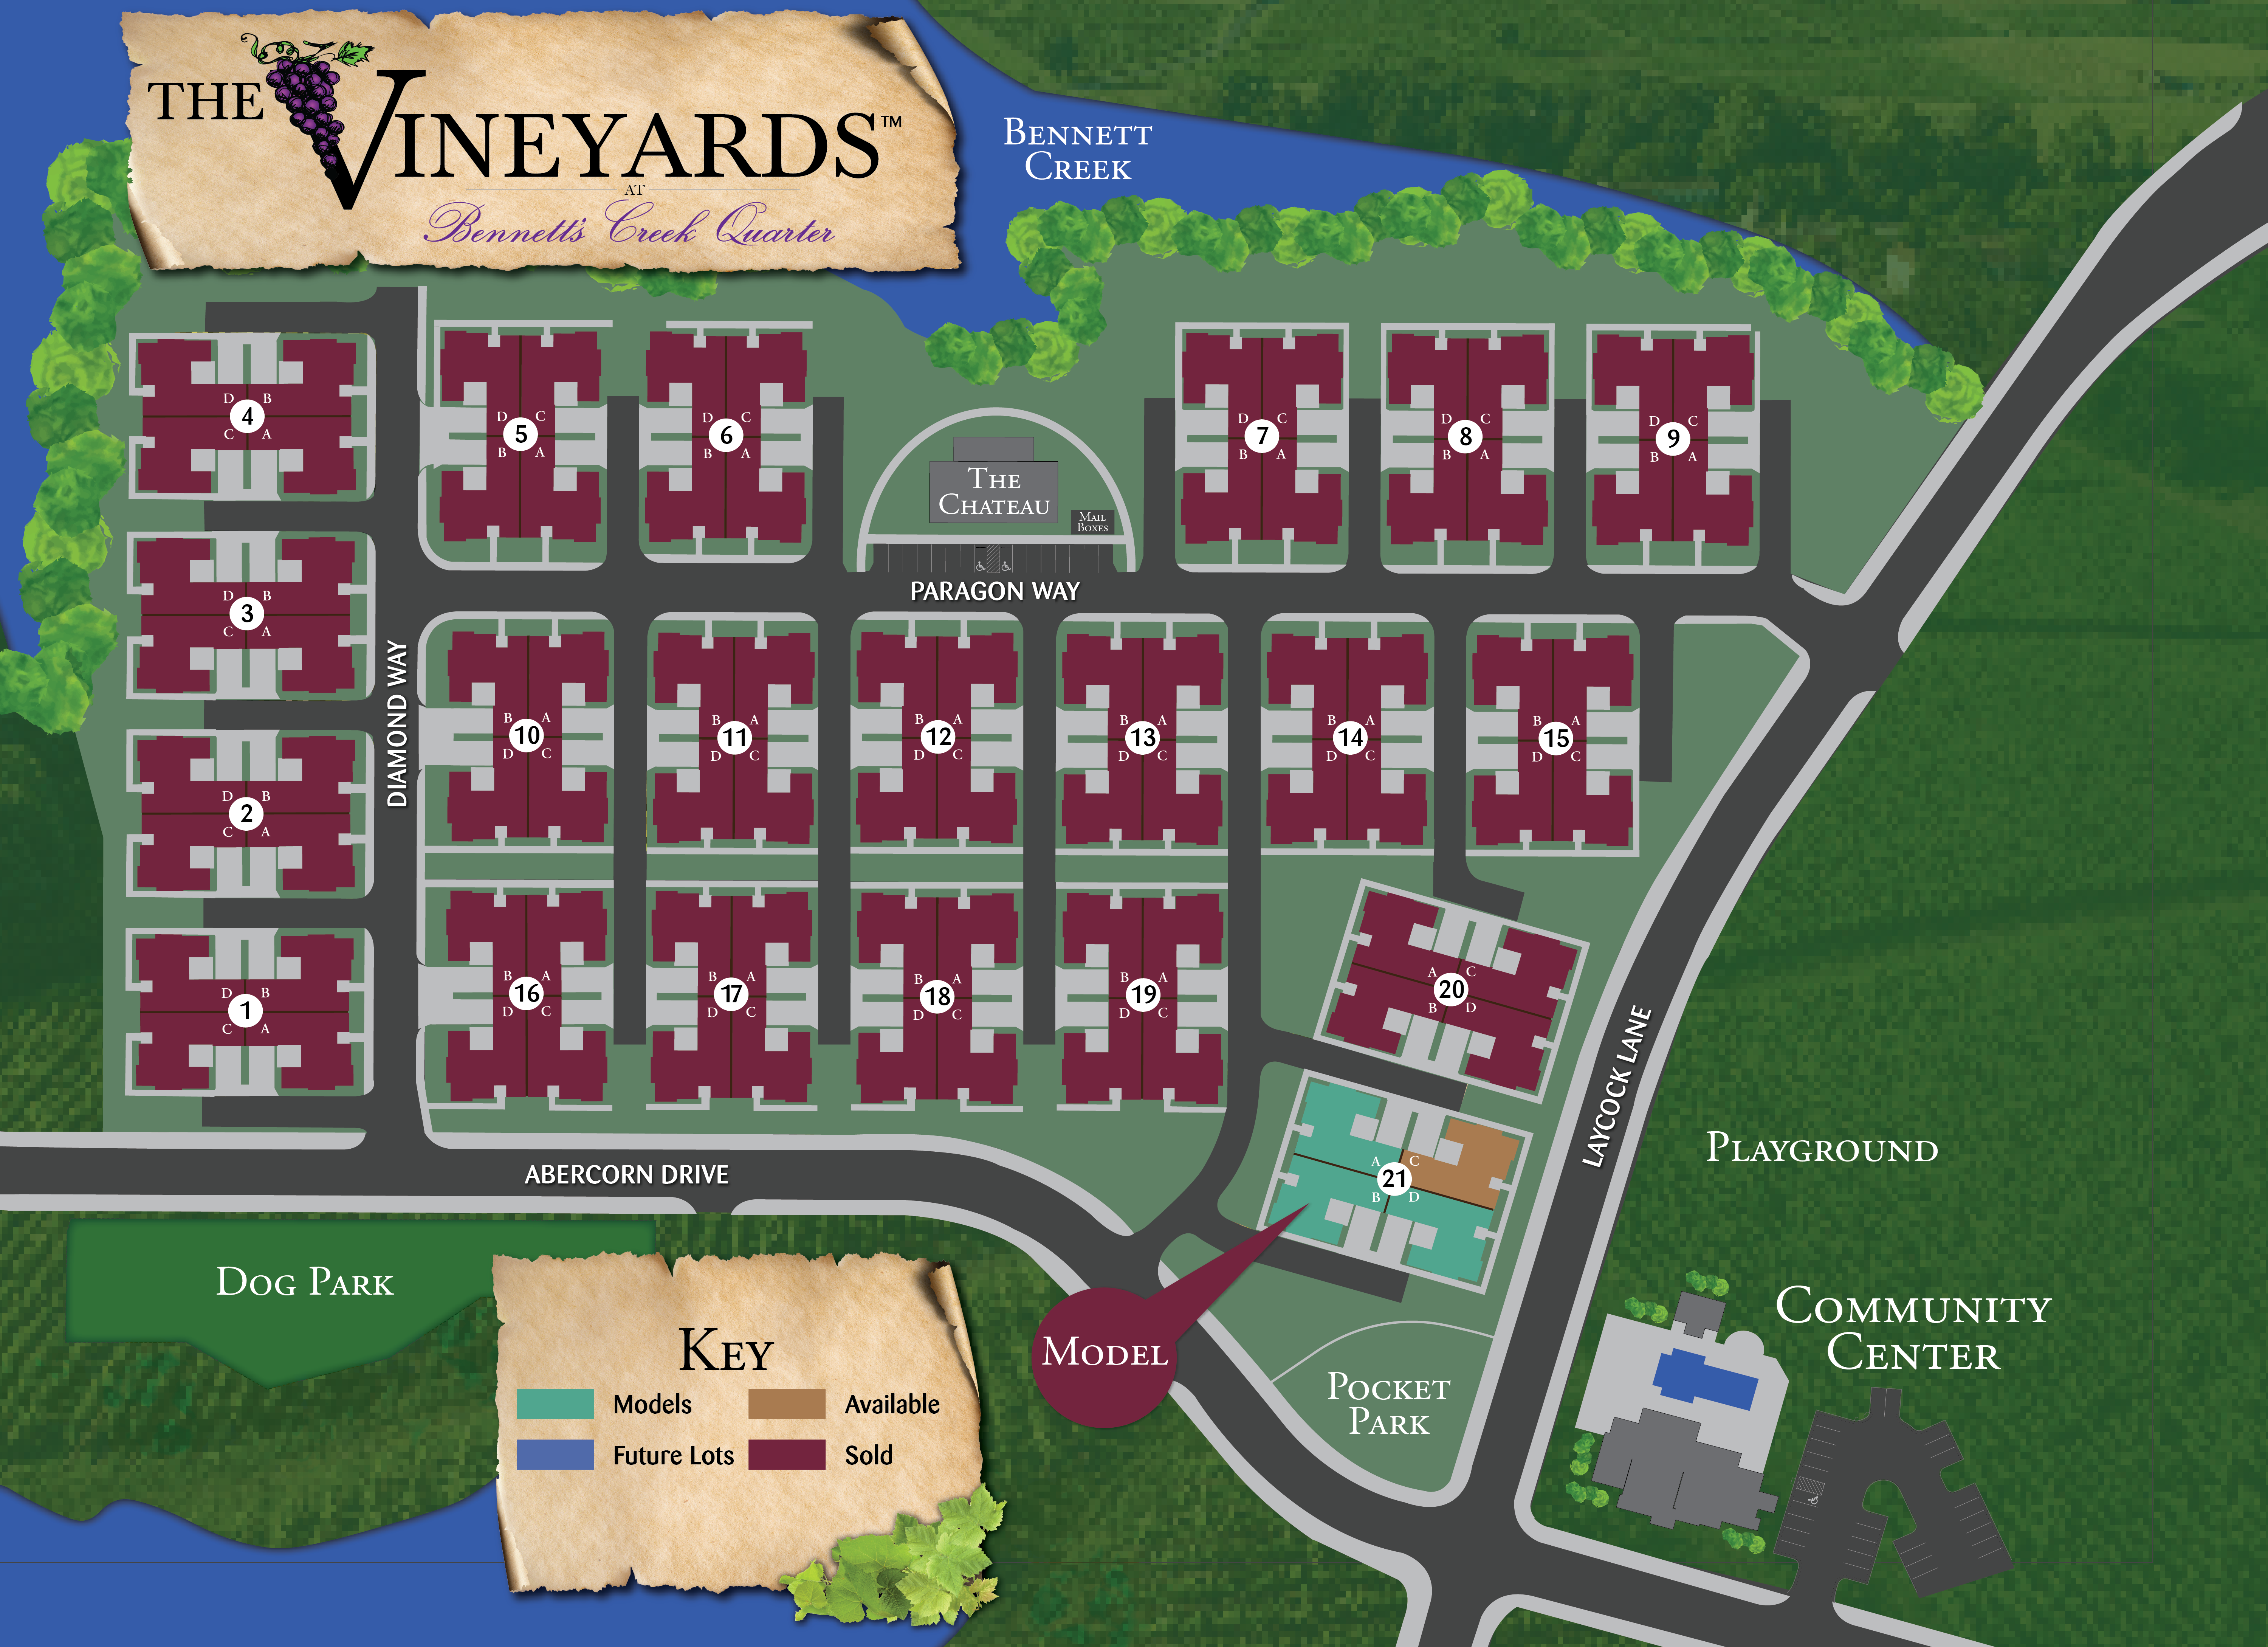 The Vineyards at Bennett's Creek Quarter site map. Shows homes available.